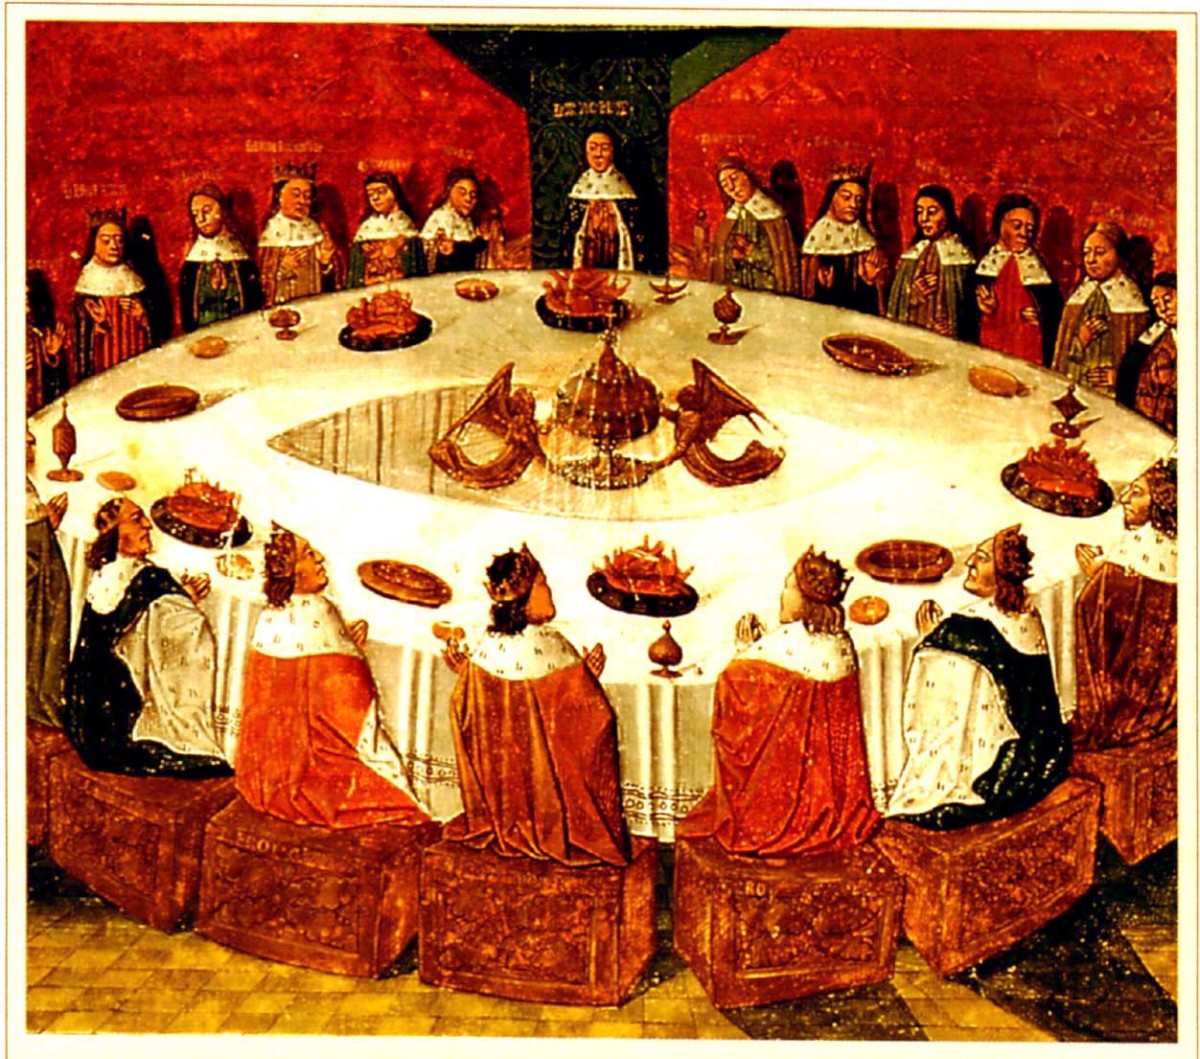 King Arthur and his Knights at Round Table